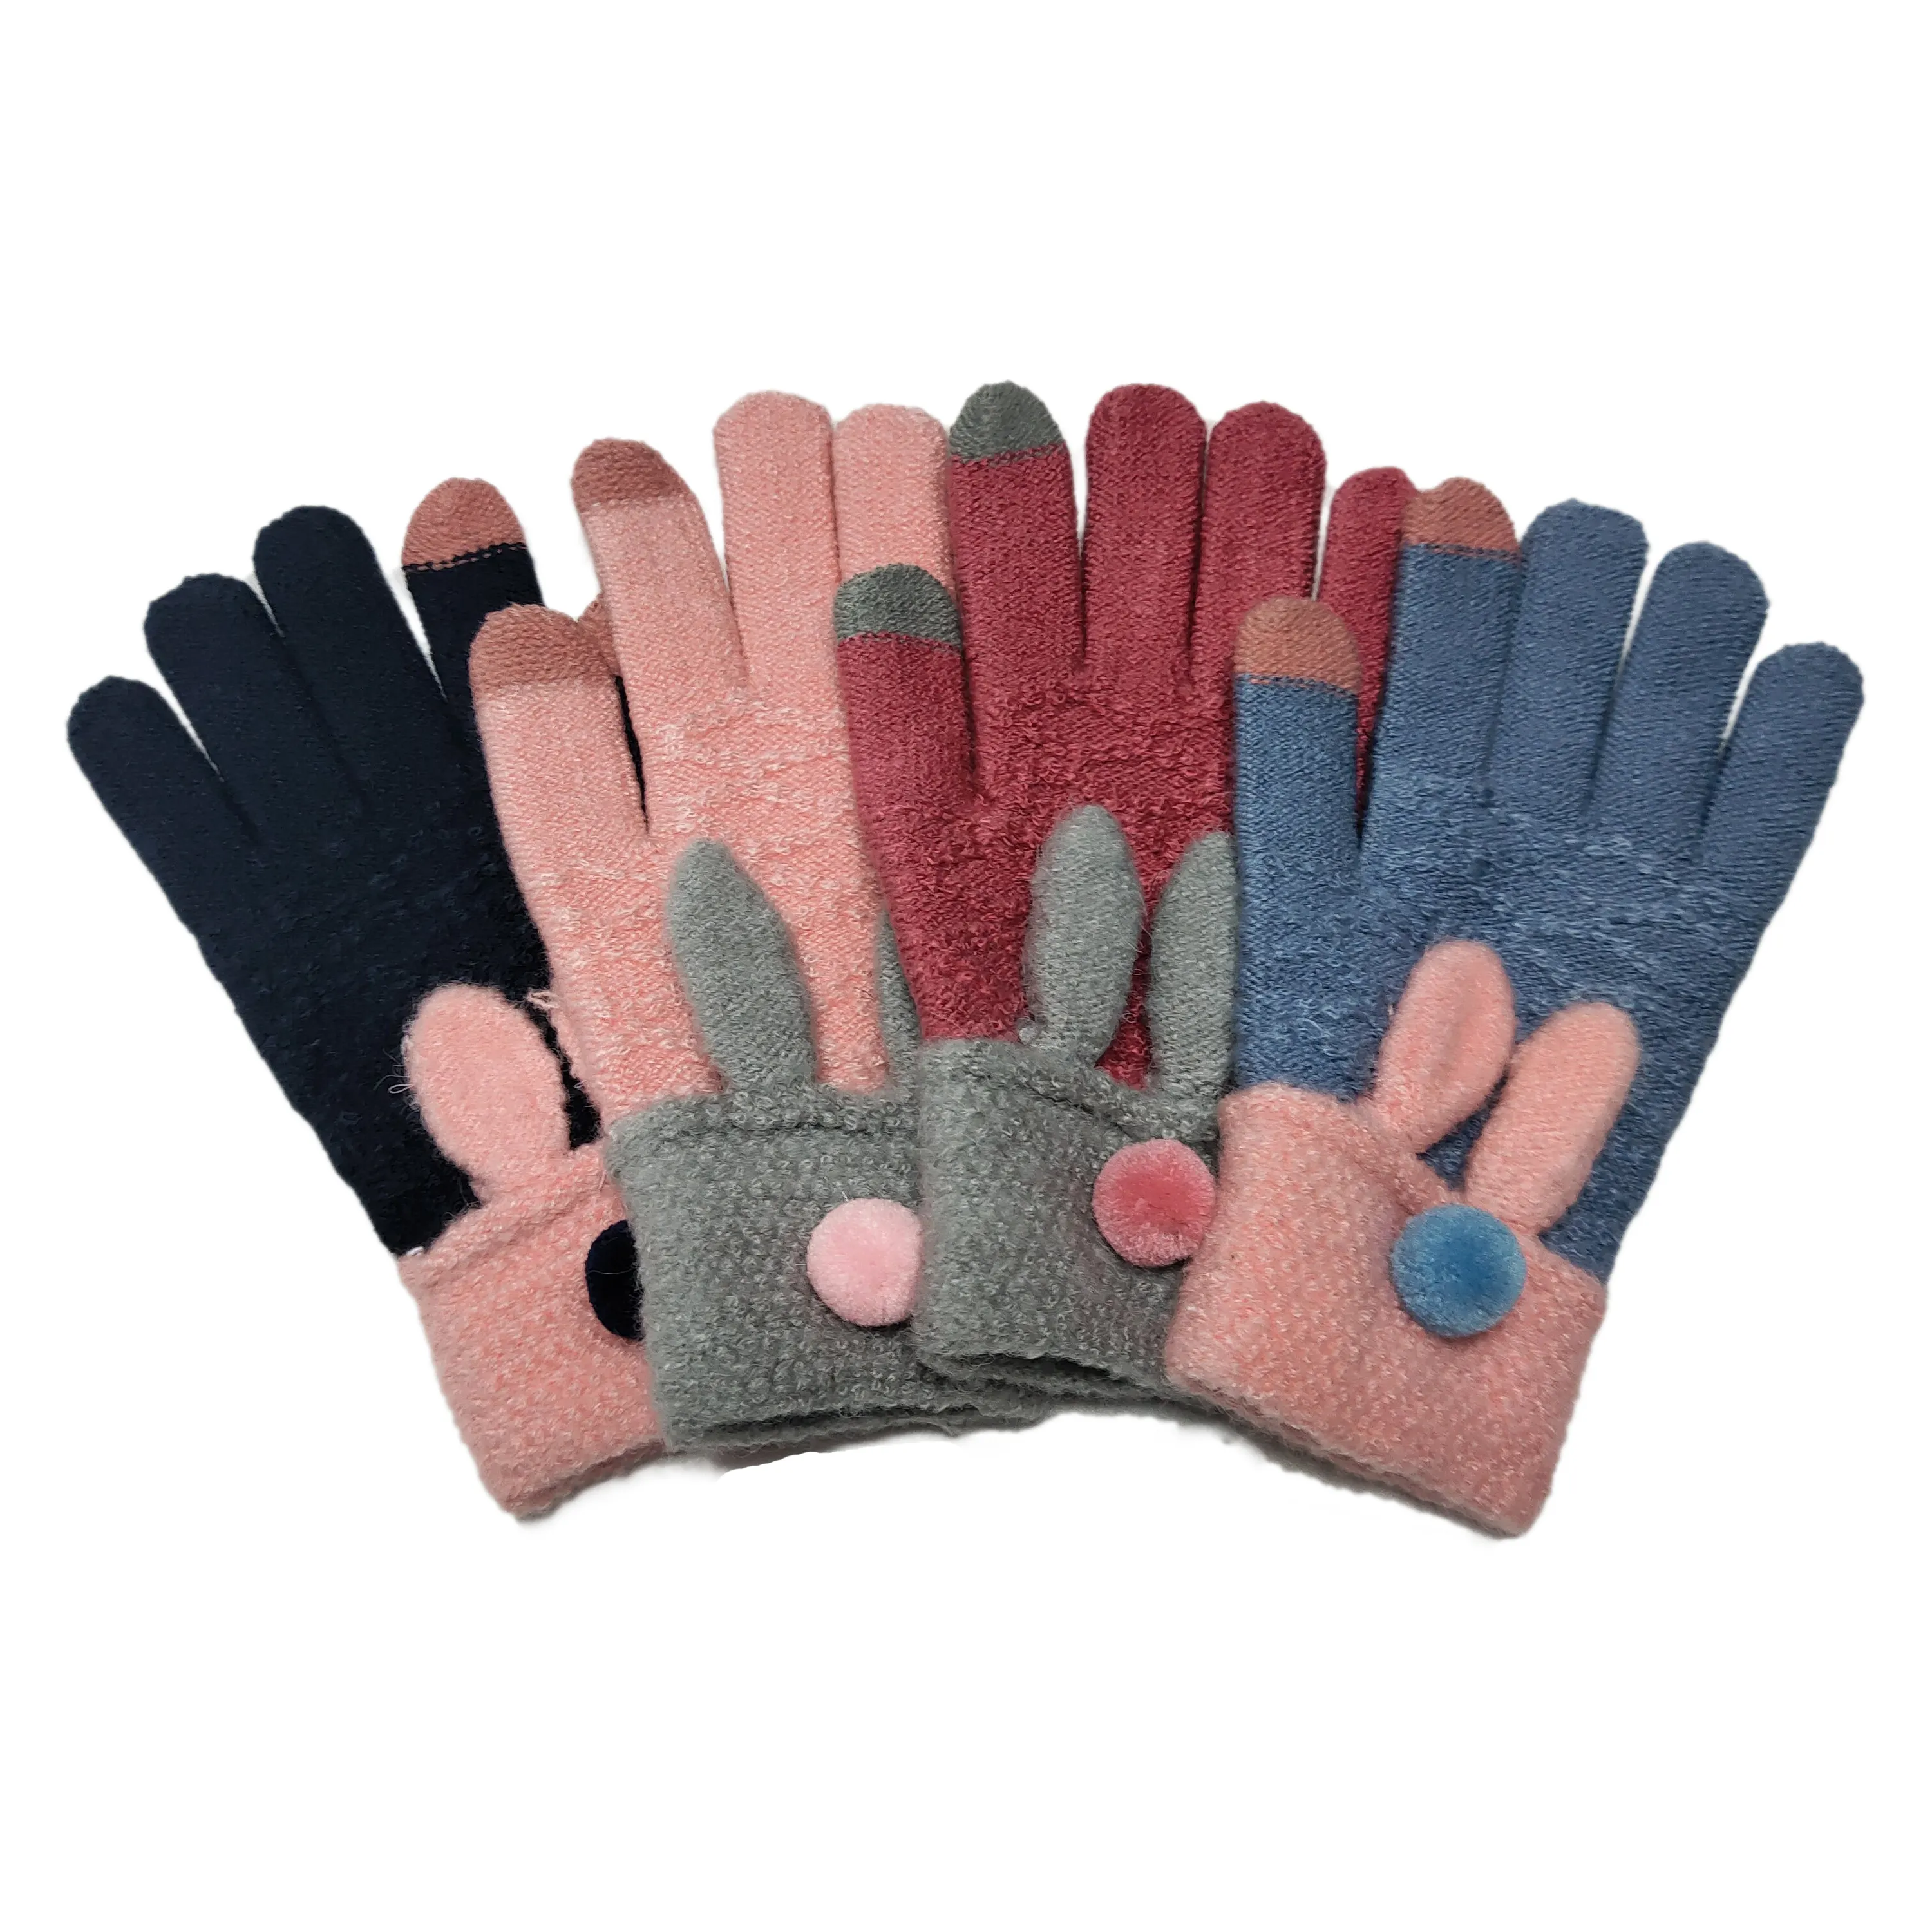 Hot sales Touch screen acrylic knitted doubld palm cartoon fashion winter hands magic gloves